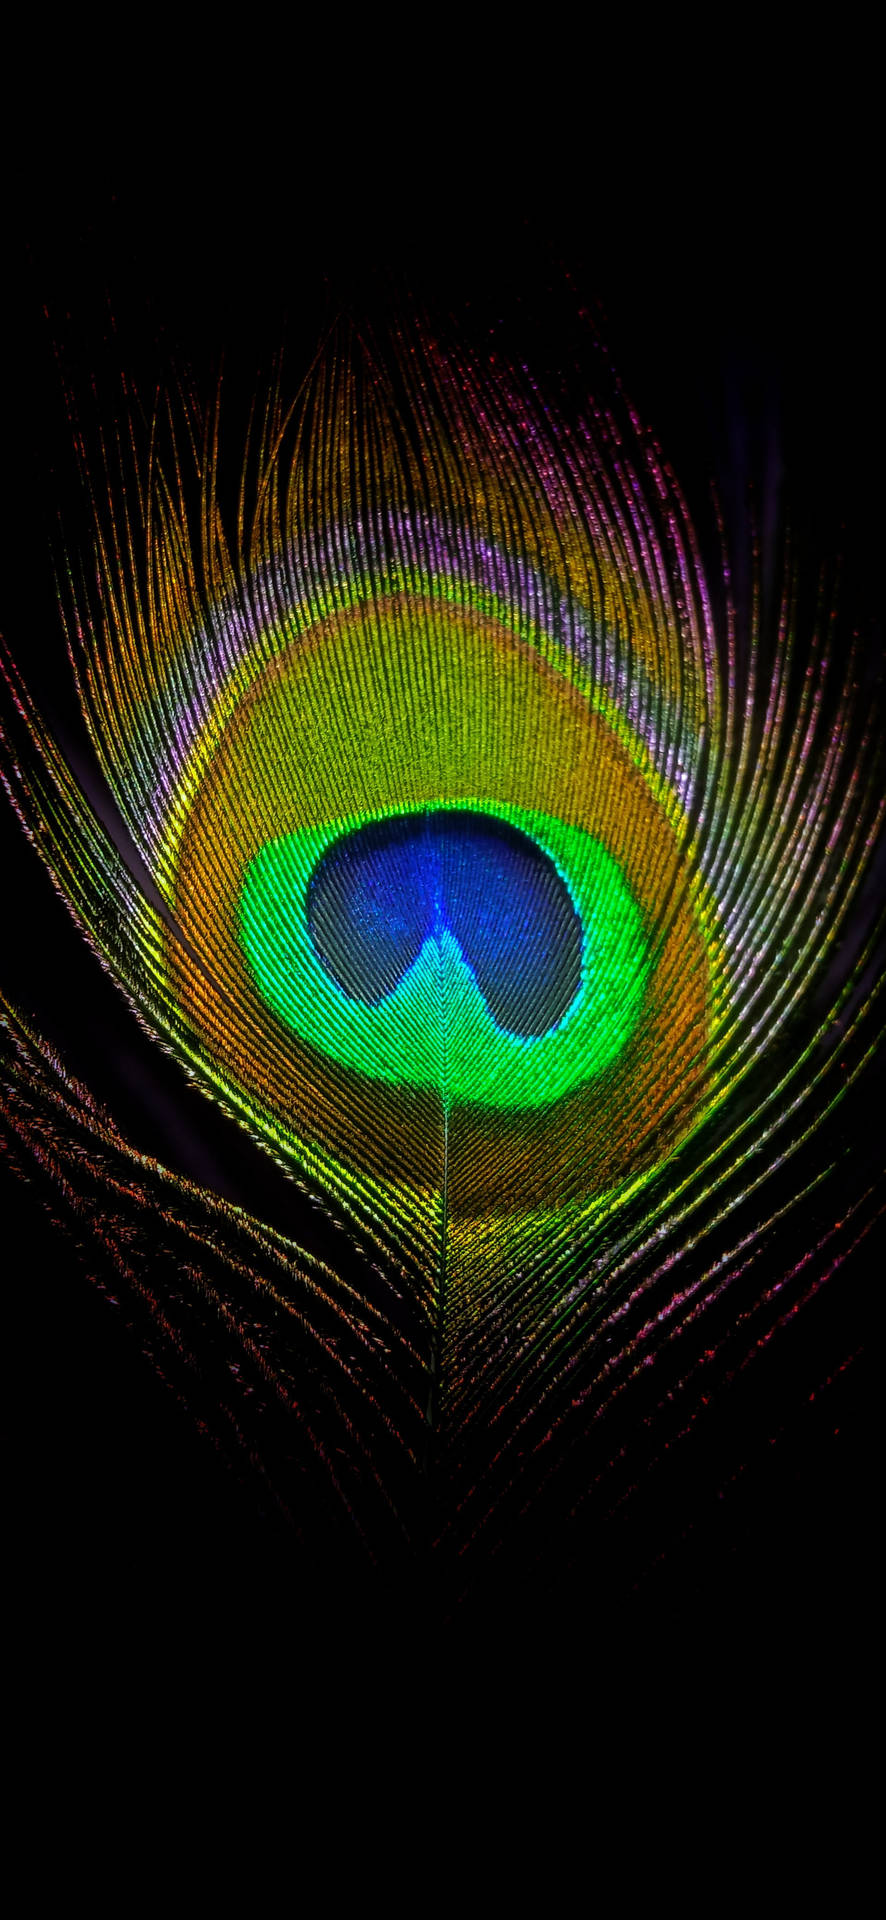 Captivating Peacock Feather On A Black Background Background